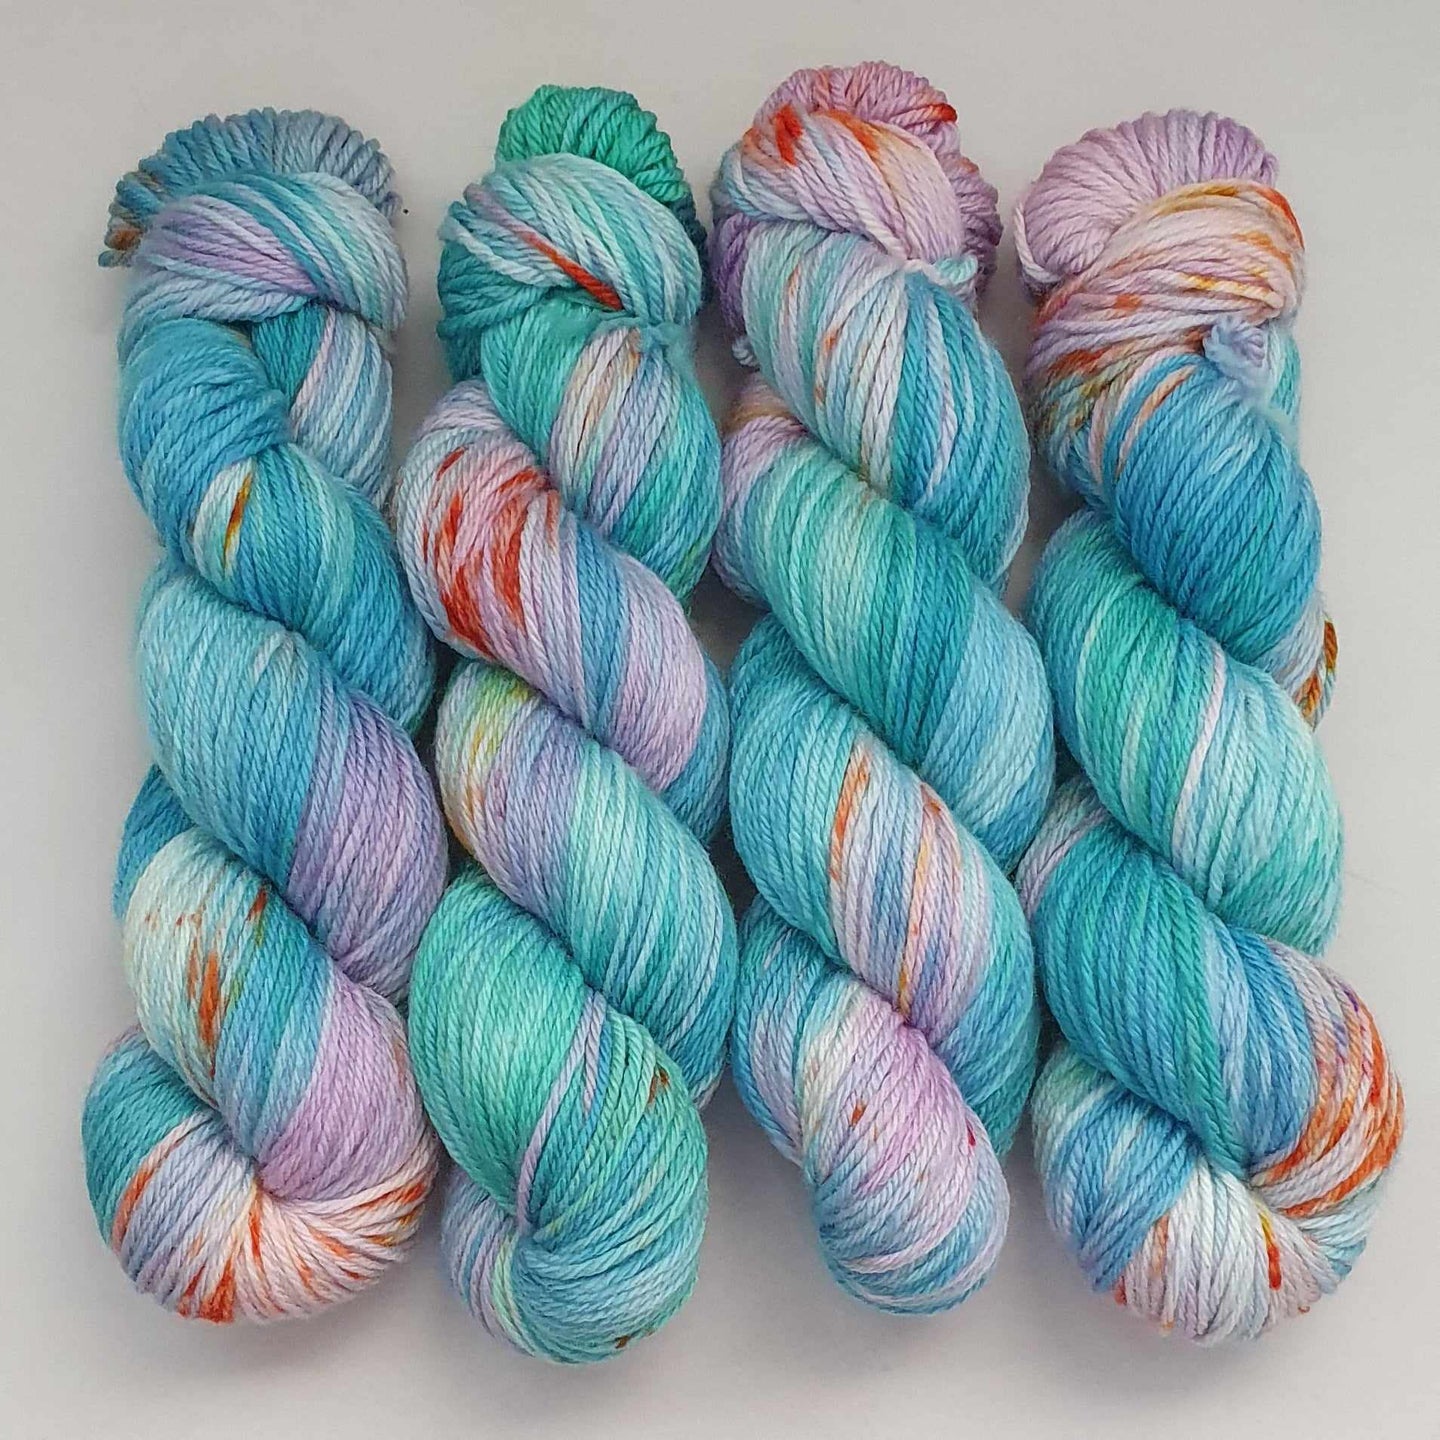 Delight (Baa-Ram-Ewe 8ply DK) (Dyed as Ordered if Not in Stock)